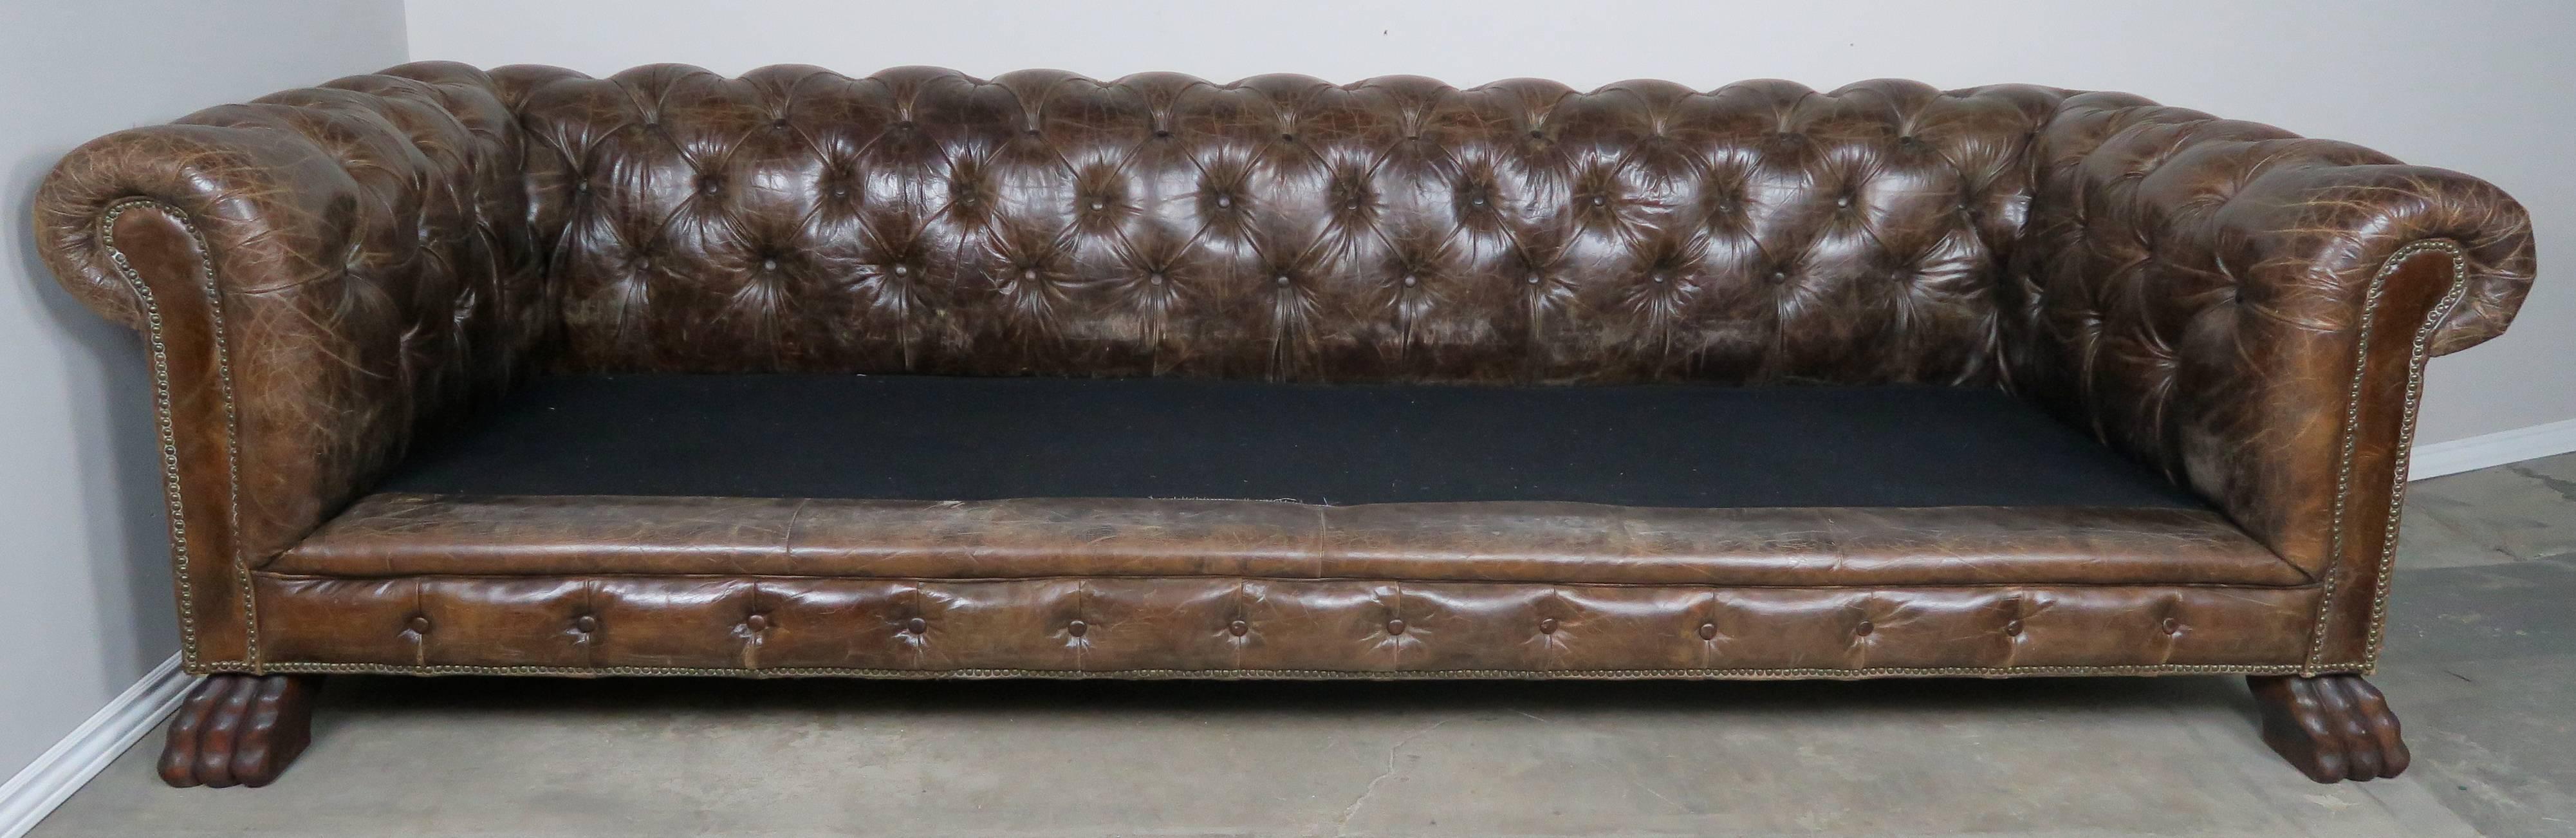 English Leather Tufted Chesterfield Style Sofa with Lion Paw Feet 1